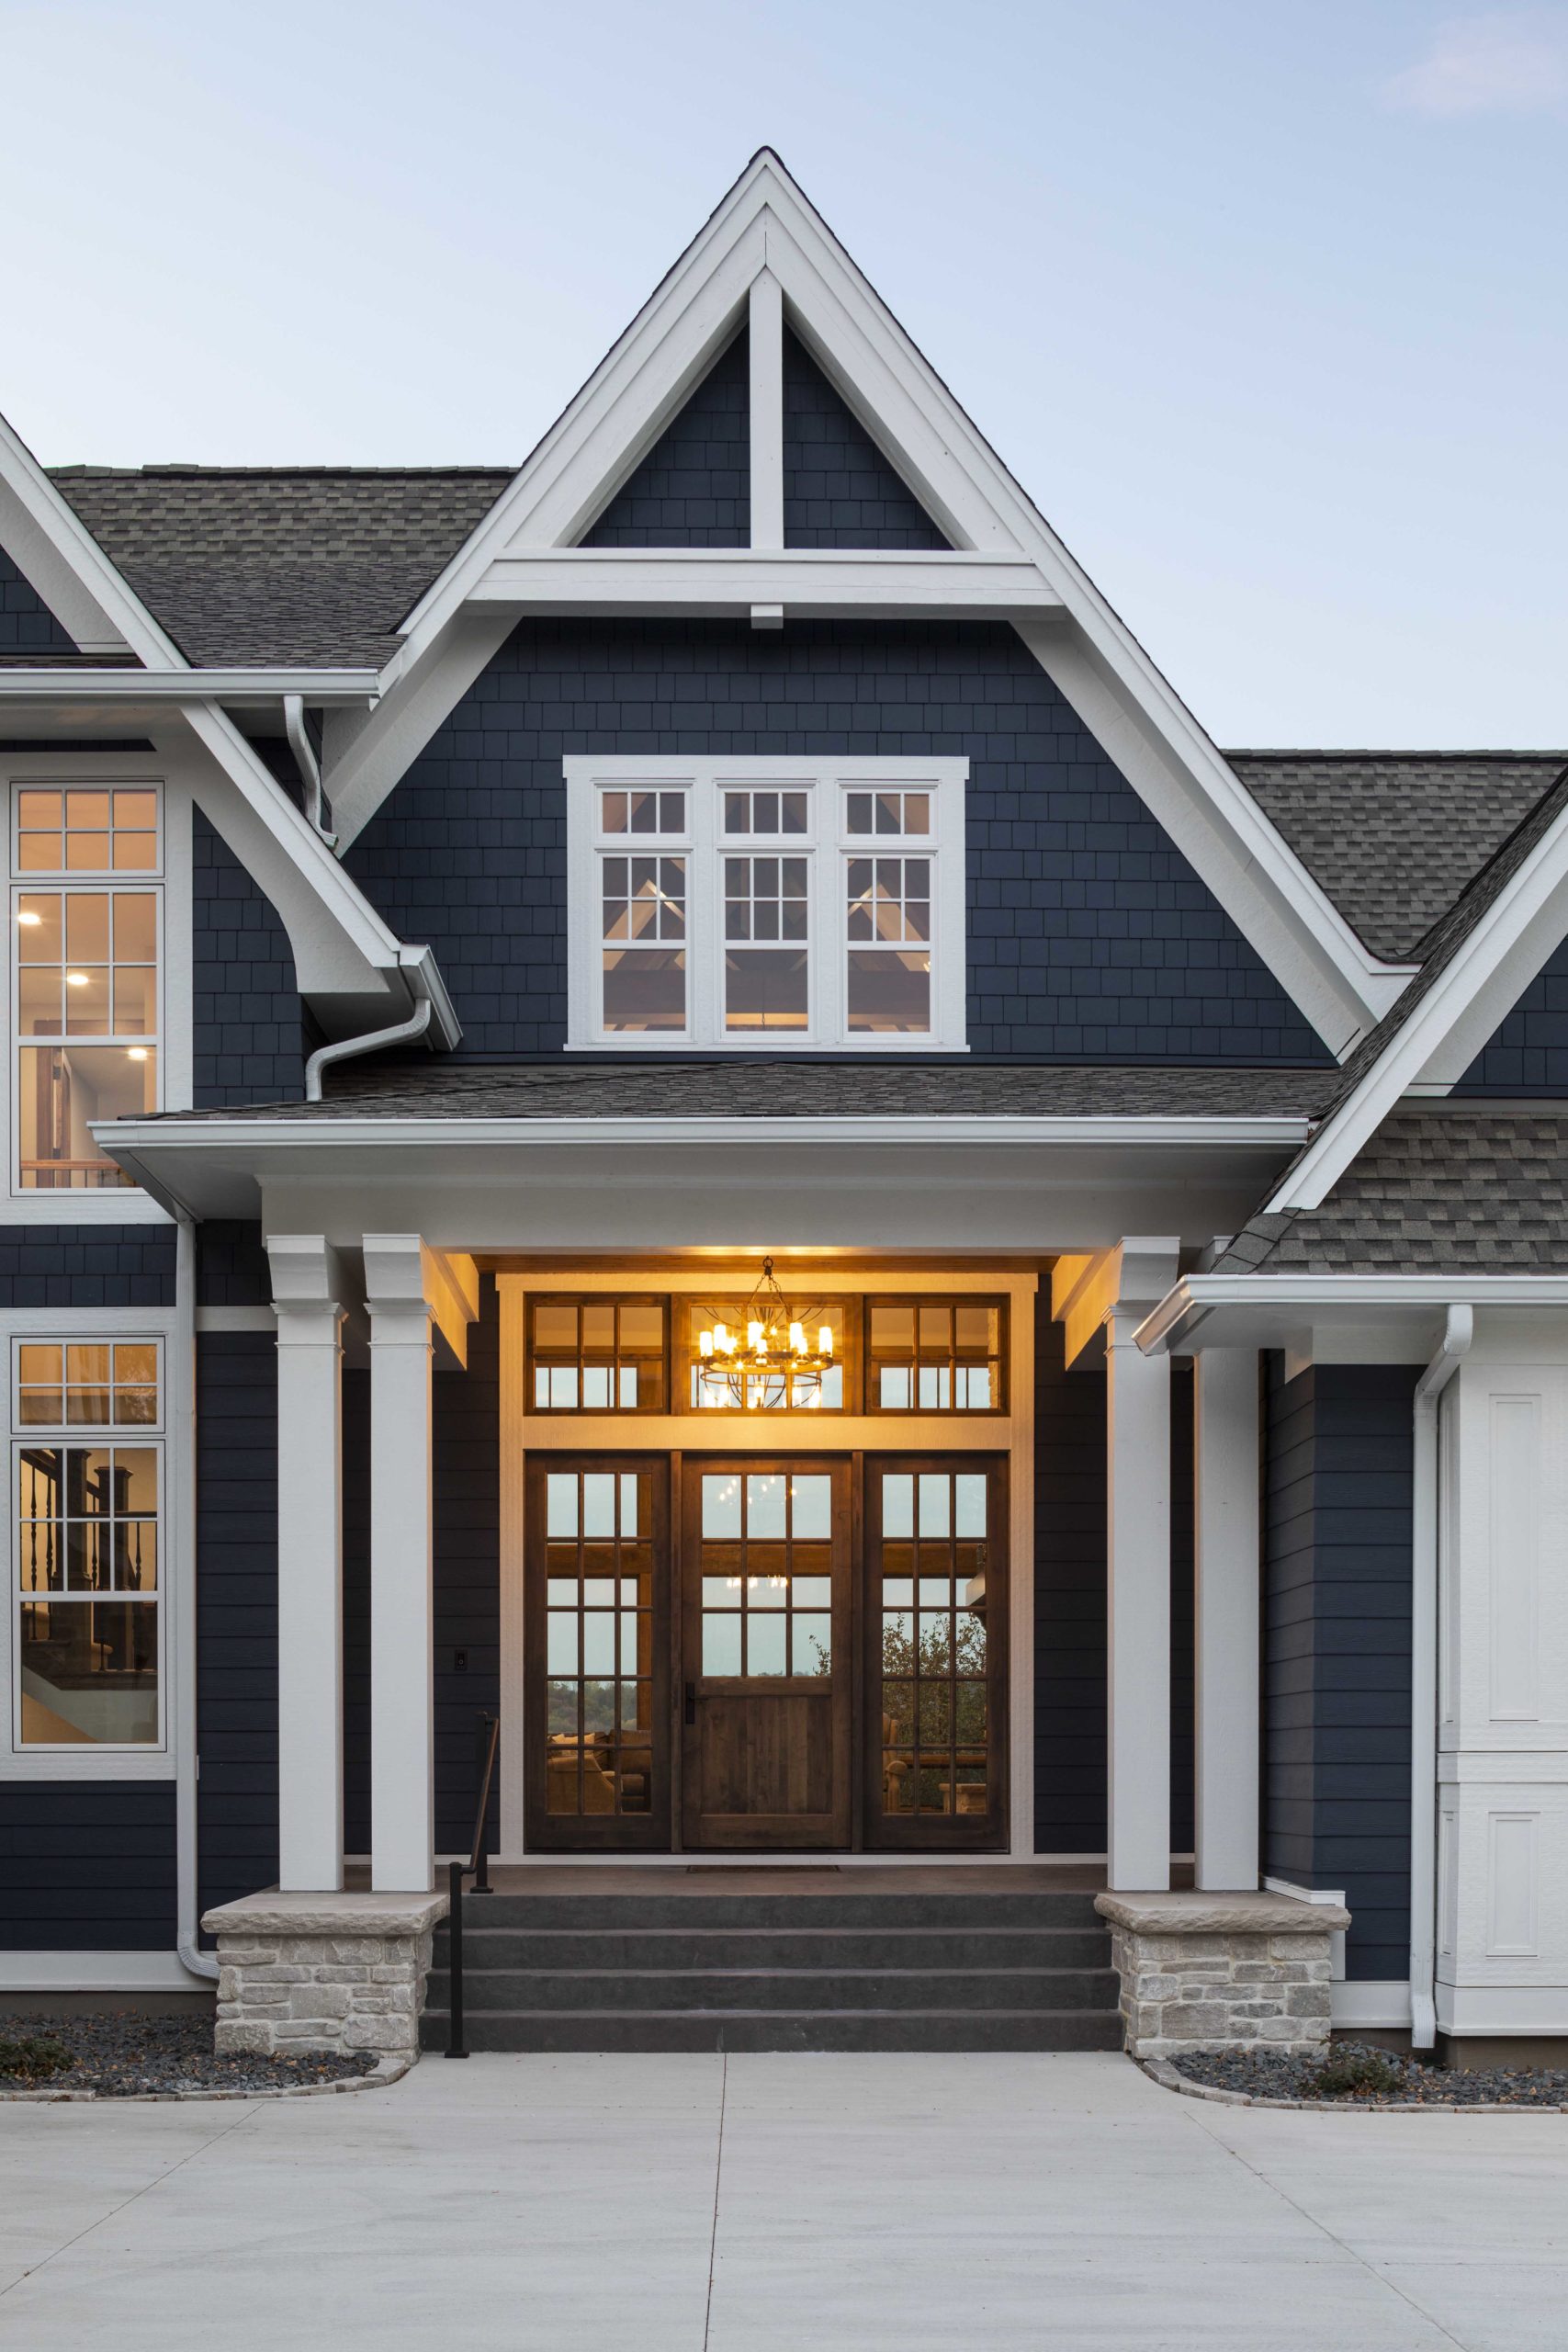 Get inspired by this blue home with white trim, perfect for your exterior design ideas.